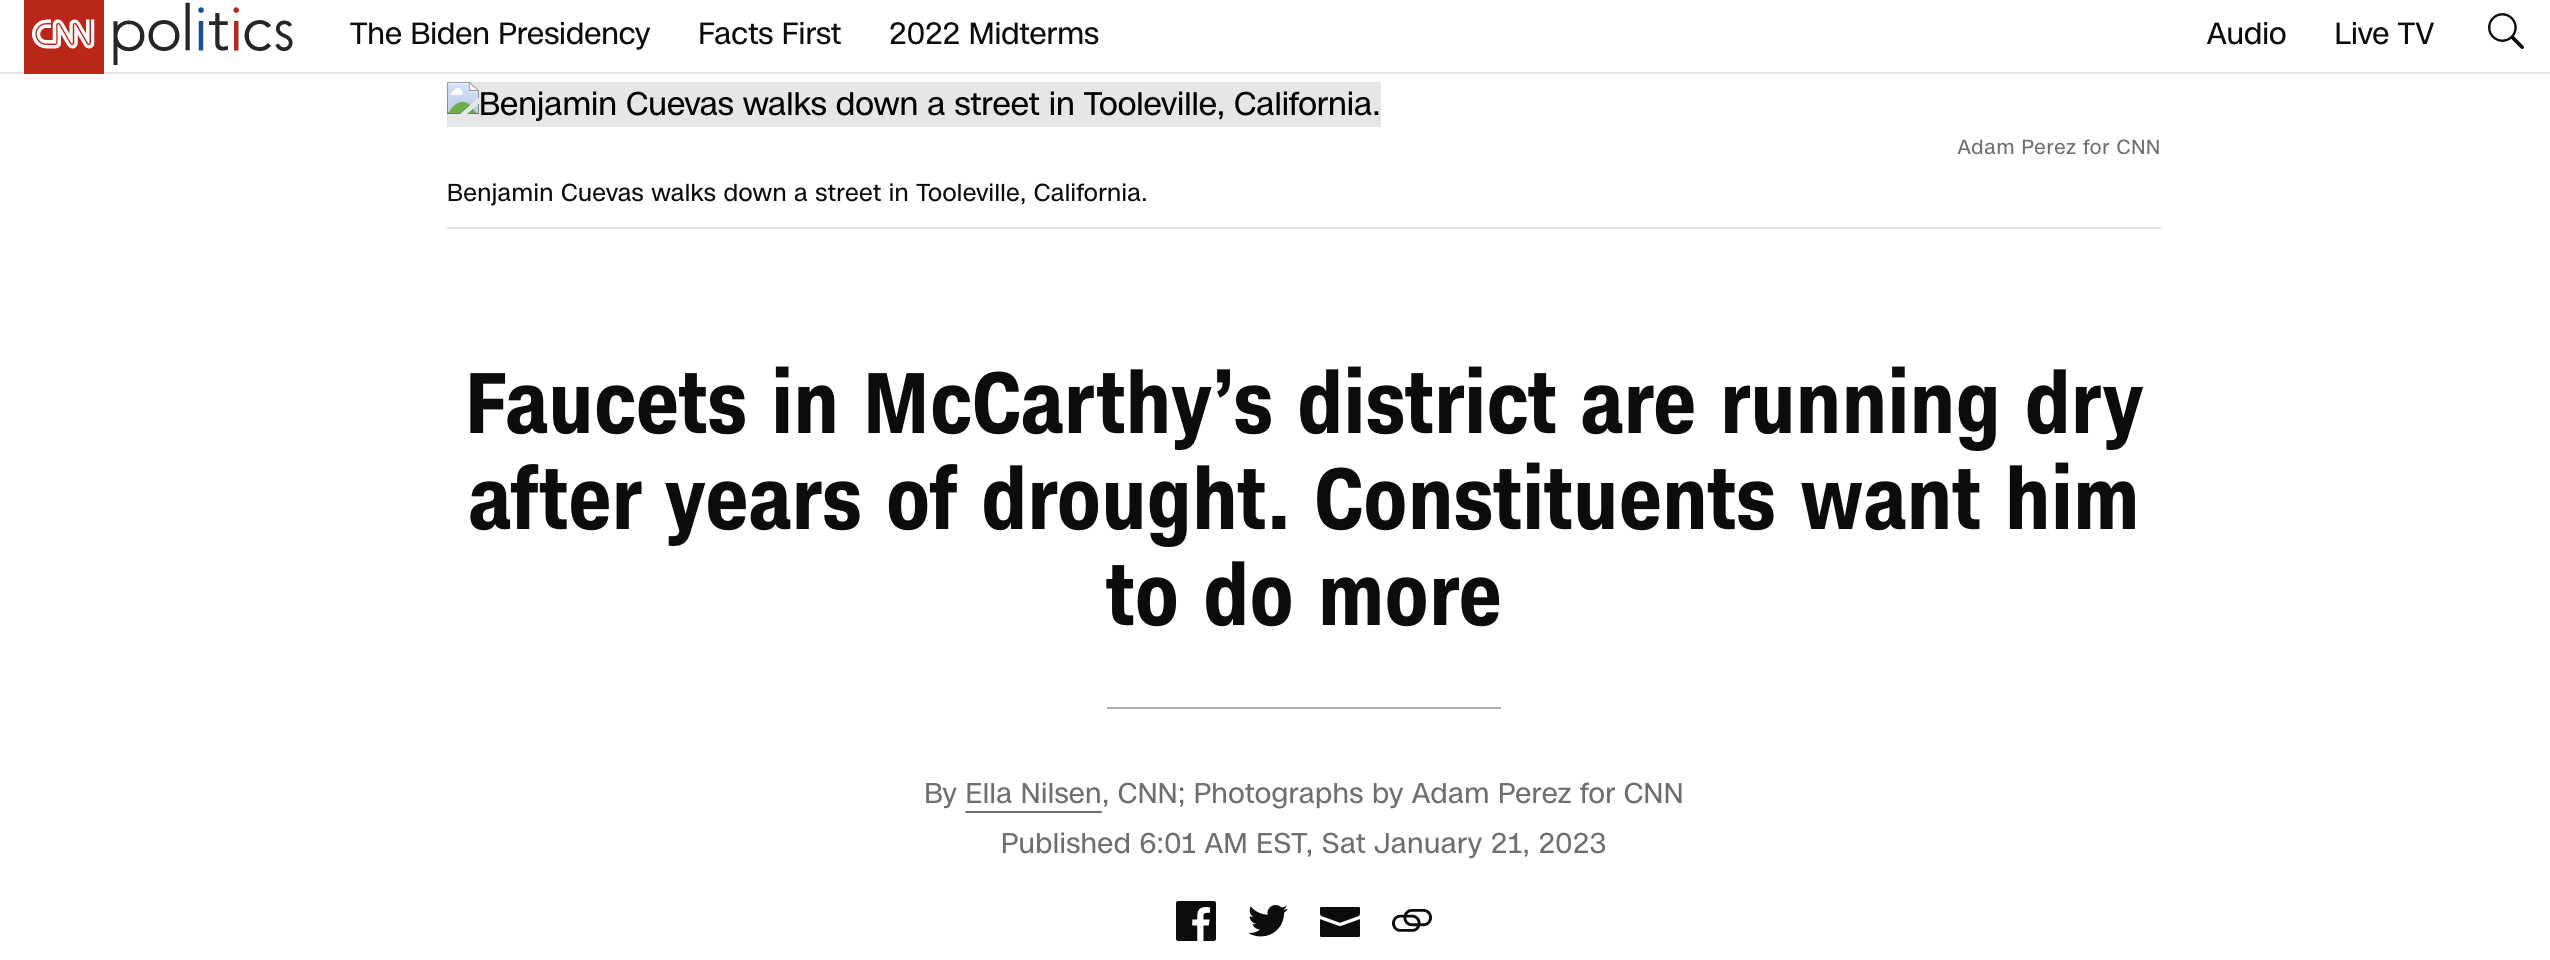 A screenshot of CNN's report on drought in McCarthy's district.